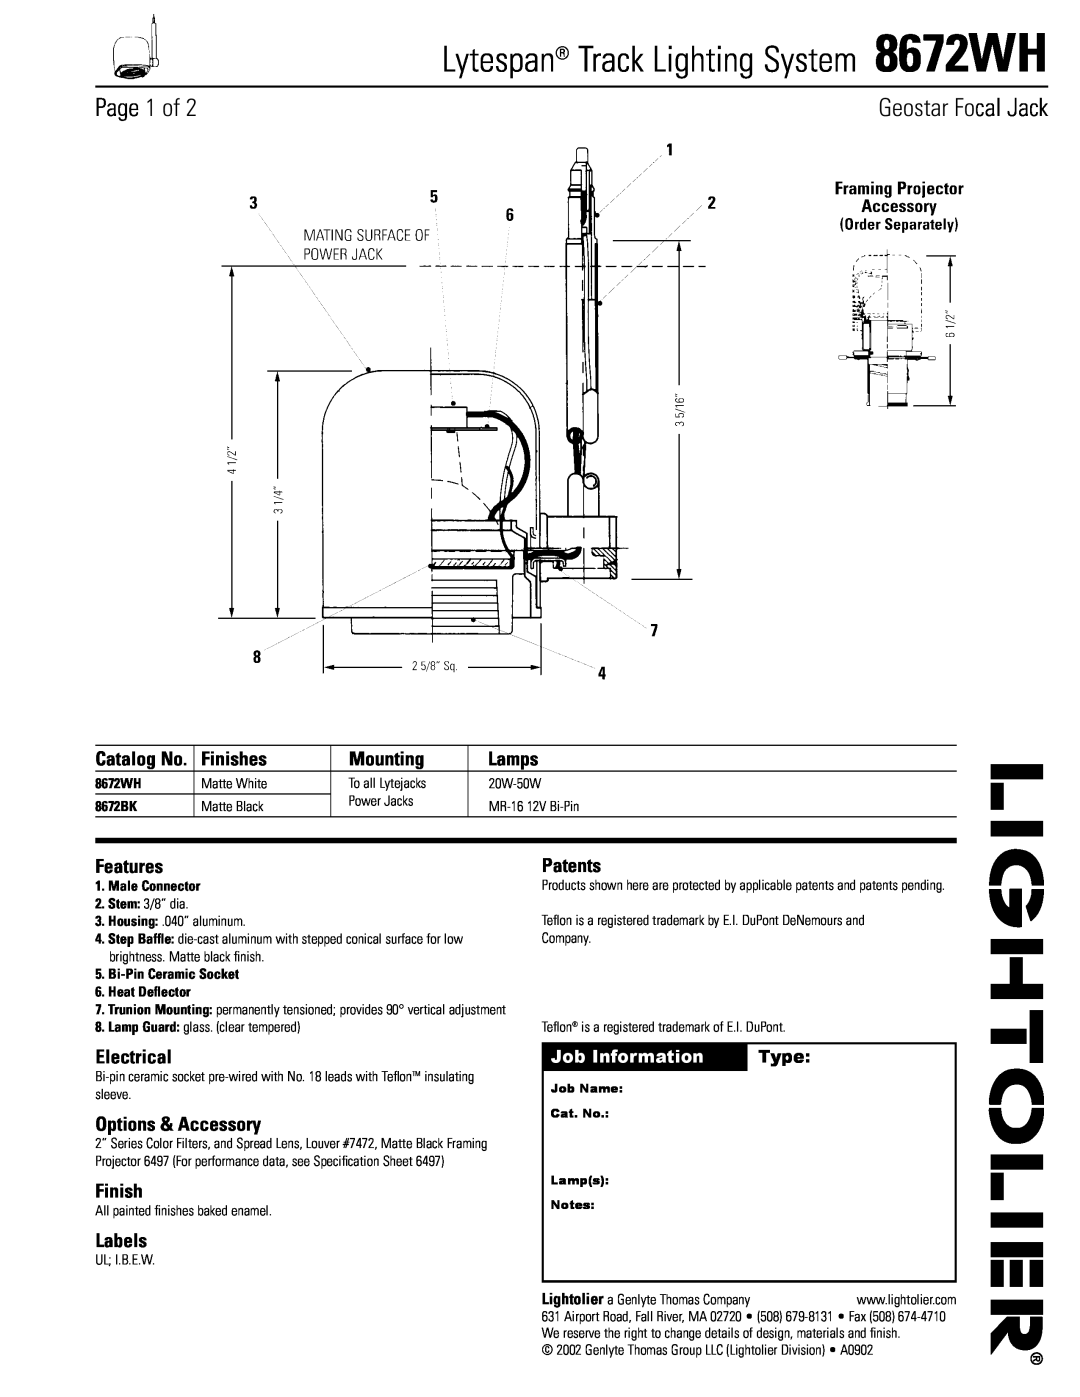 Lightolier 8672WH specifications Finishes, Mounting, Lamps, Features, Patents, Electrical, Options & Accessory, Labels 